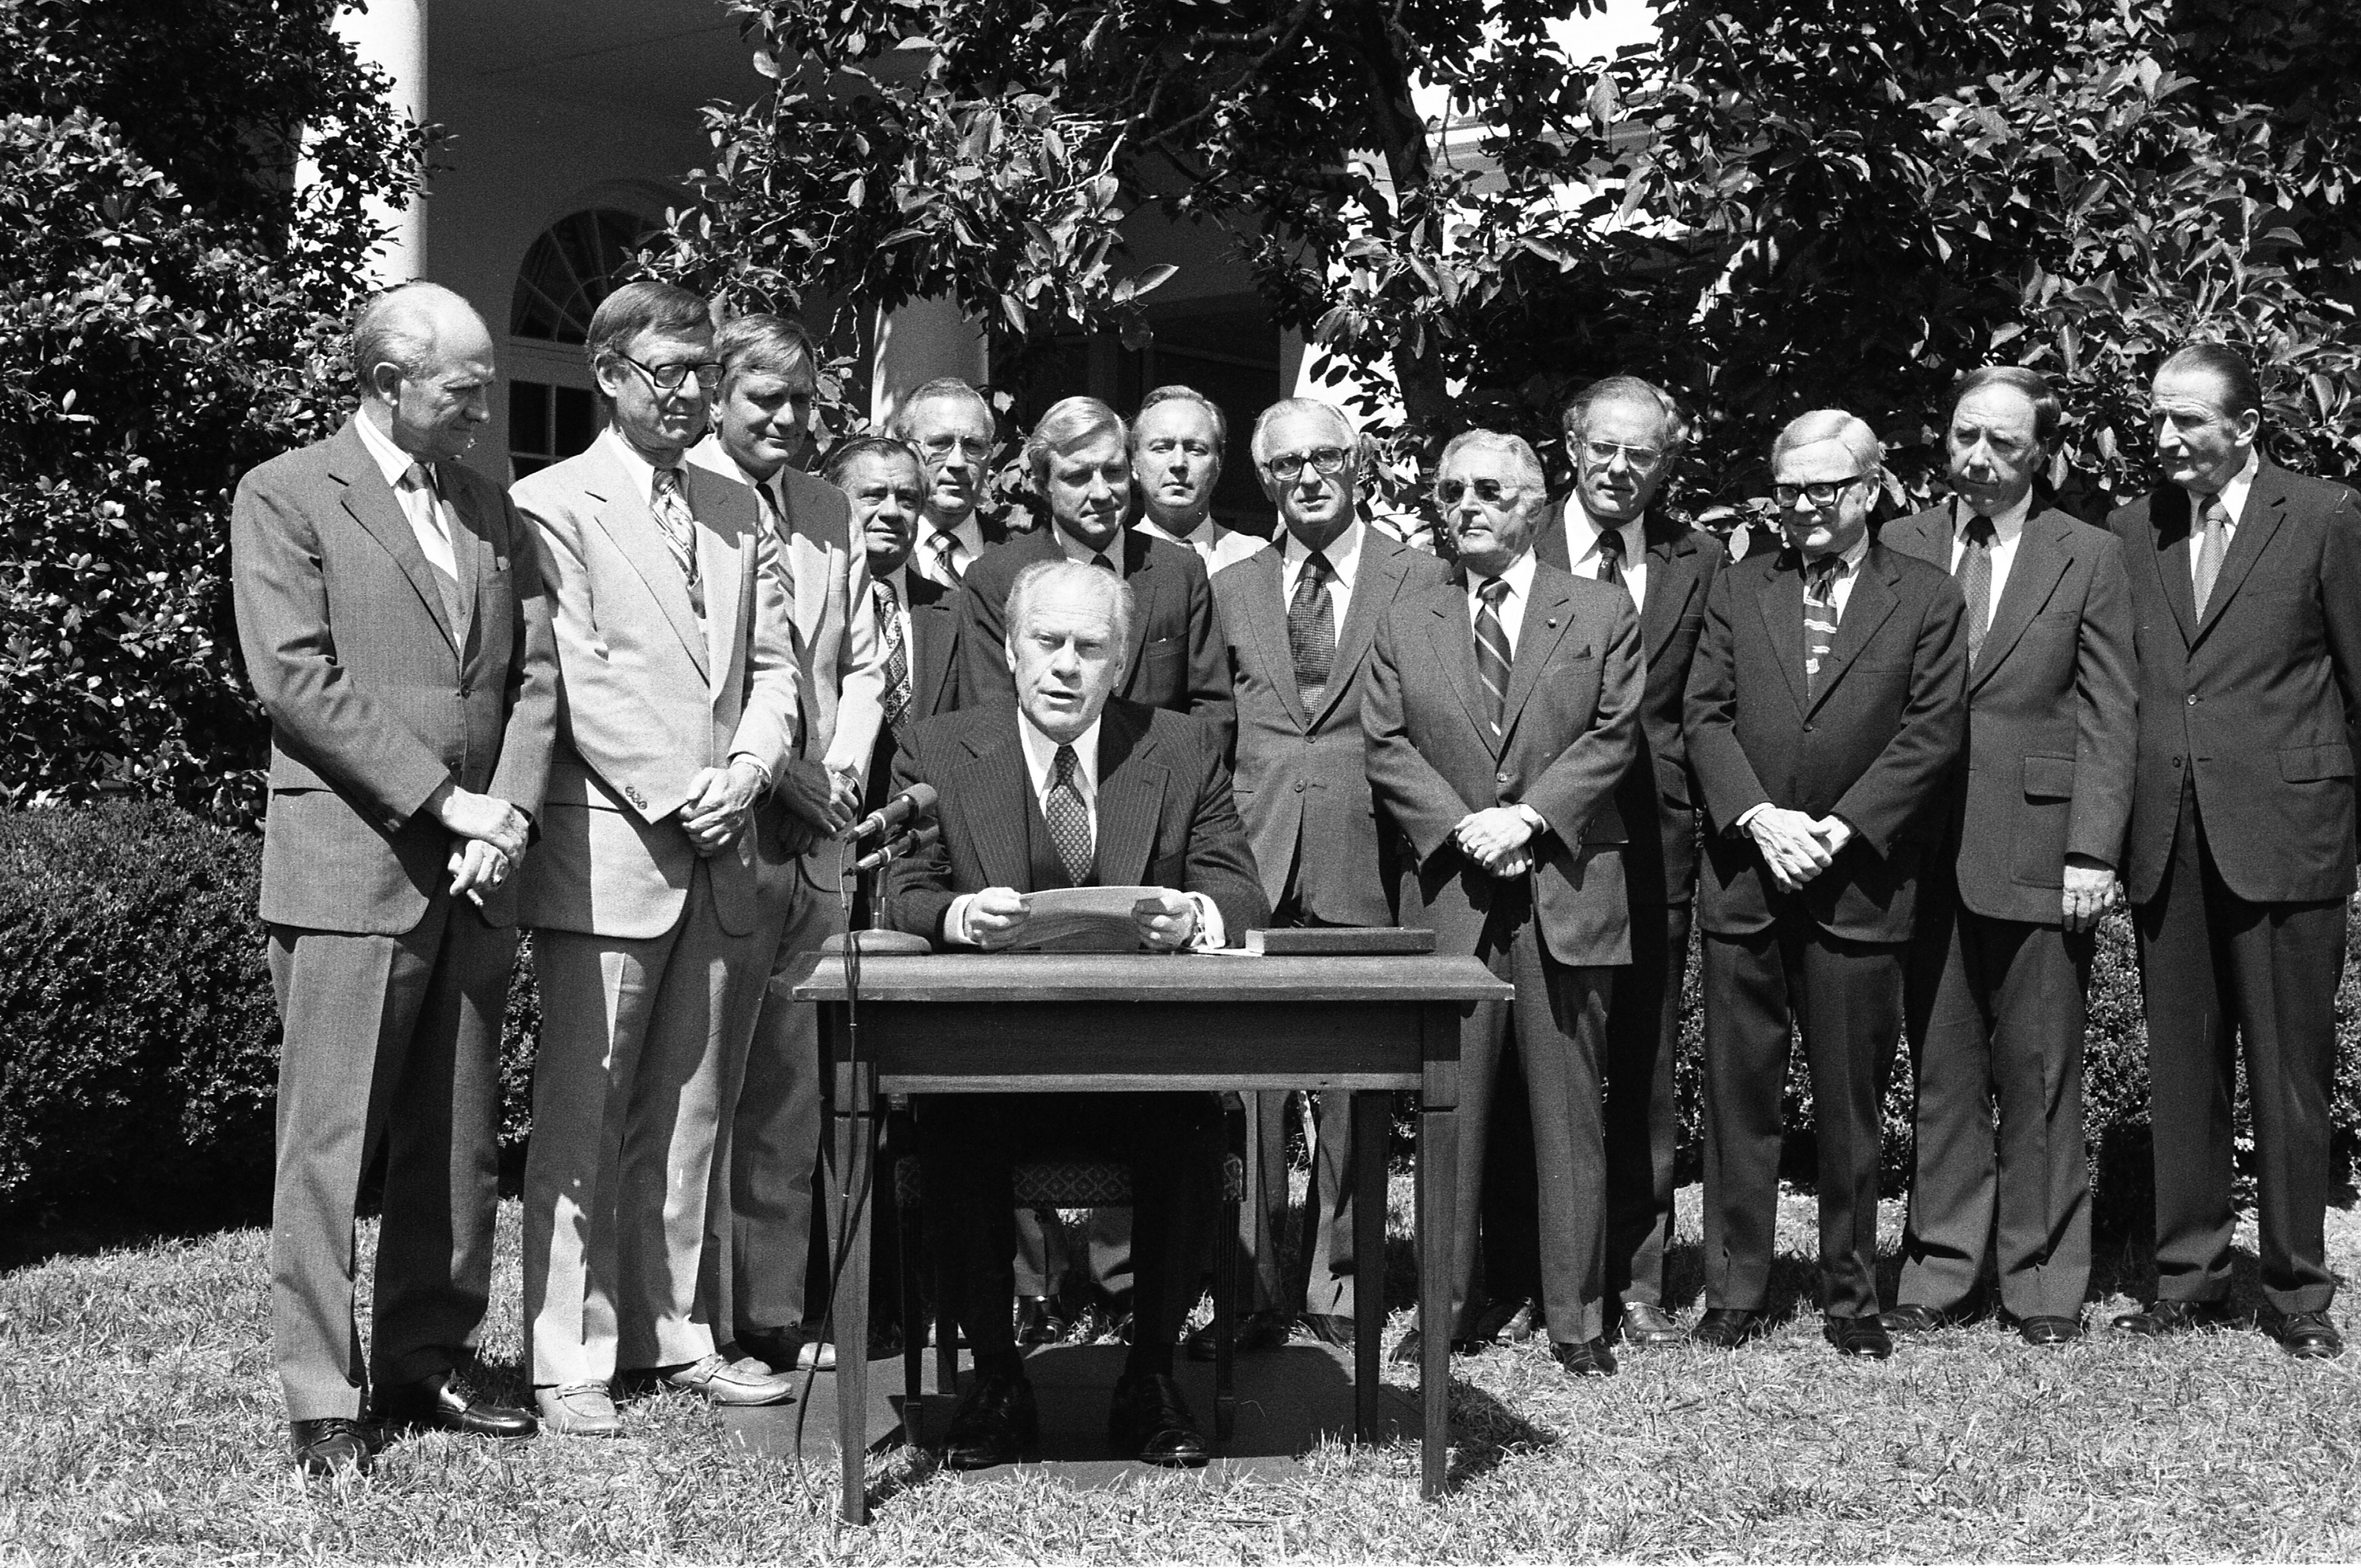 President Gerald Ford and several members of Congress at the signing ceremony for the Government in the Sunshine Act, 9/13/1976